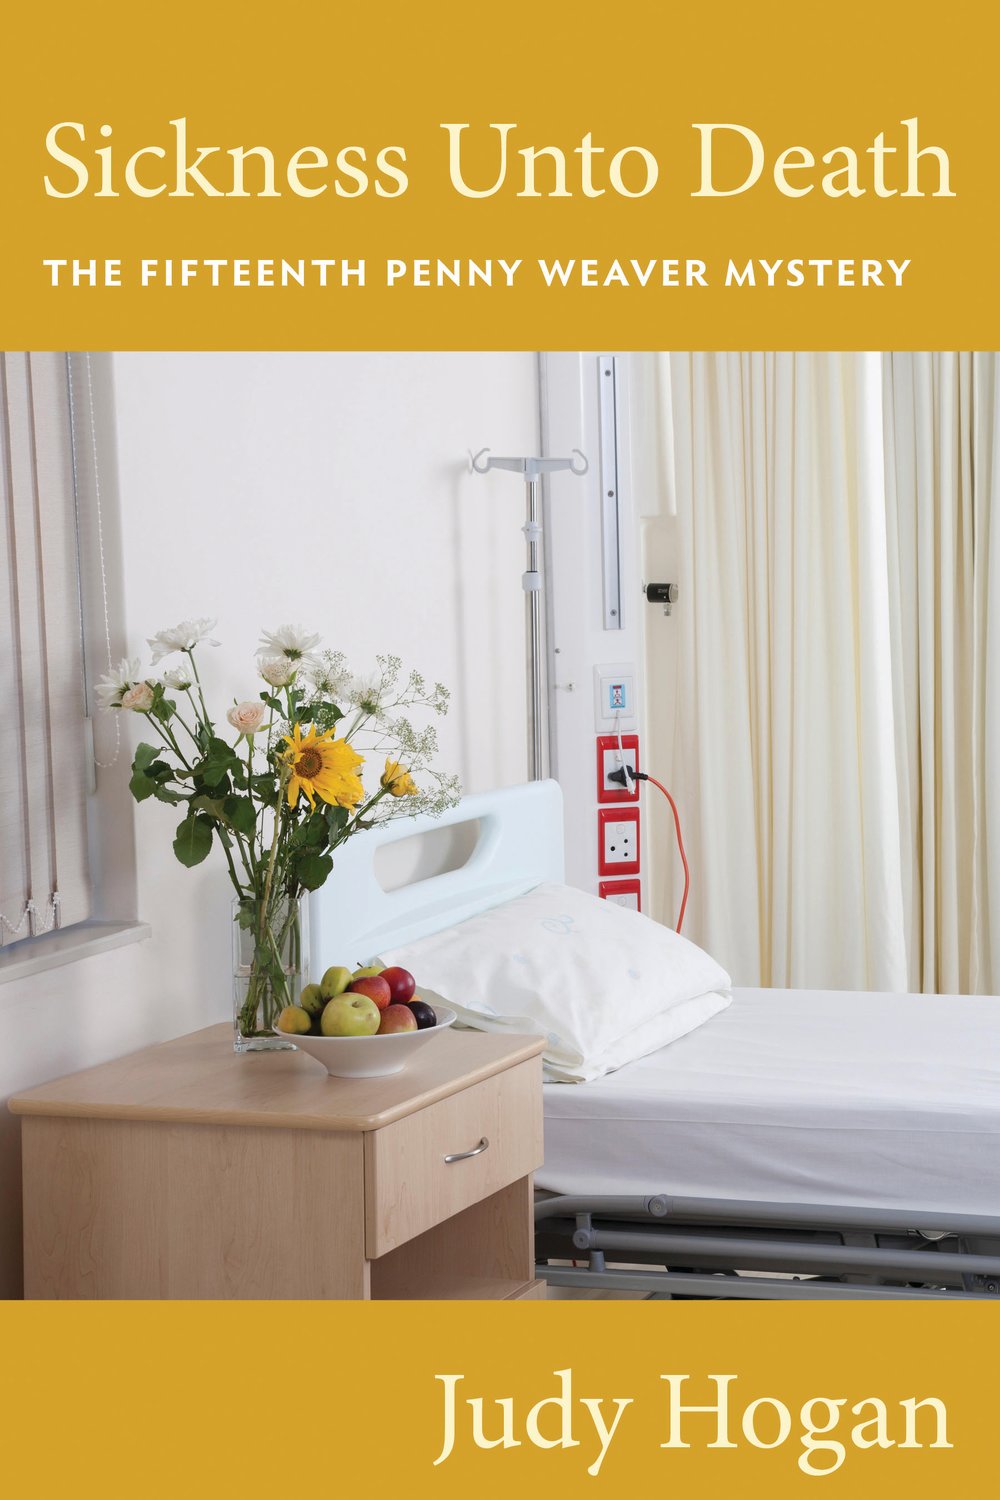 'Sickness Unto Death' is the latest in Judy Hogan's 'Penny Weaver' mystery series.